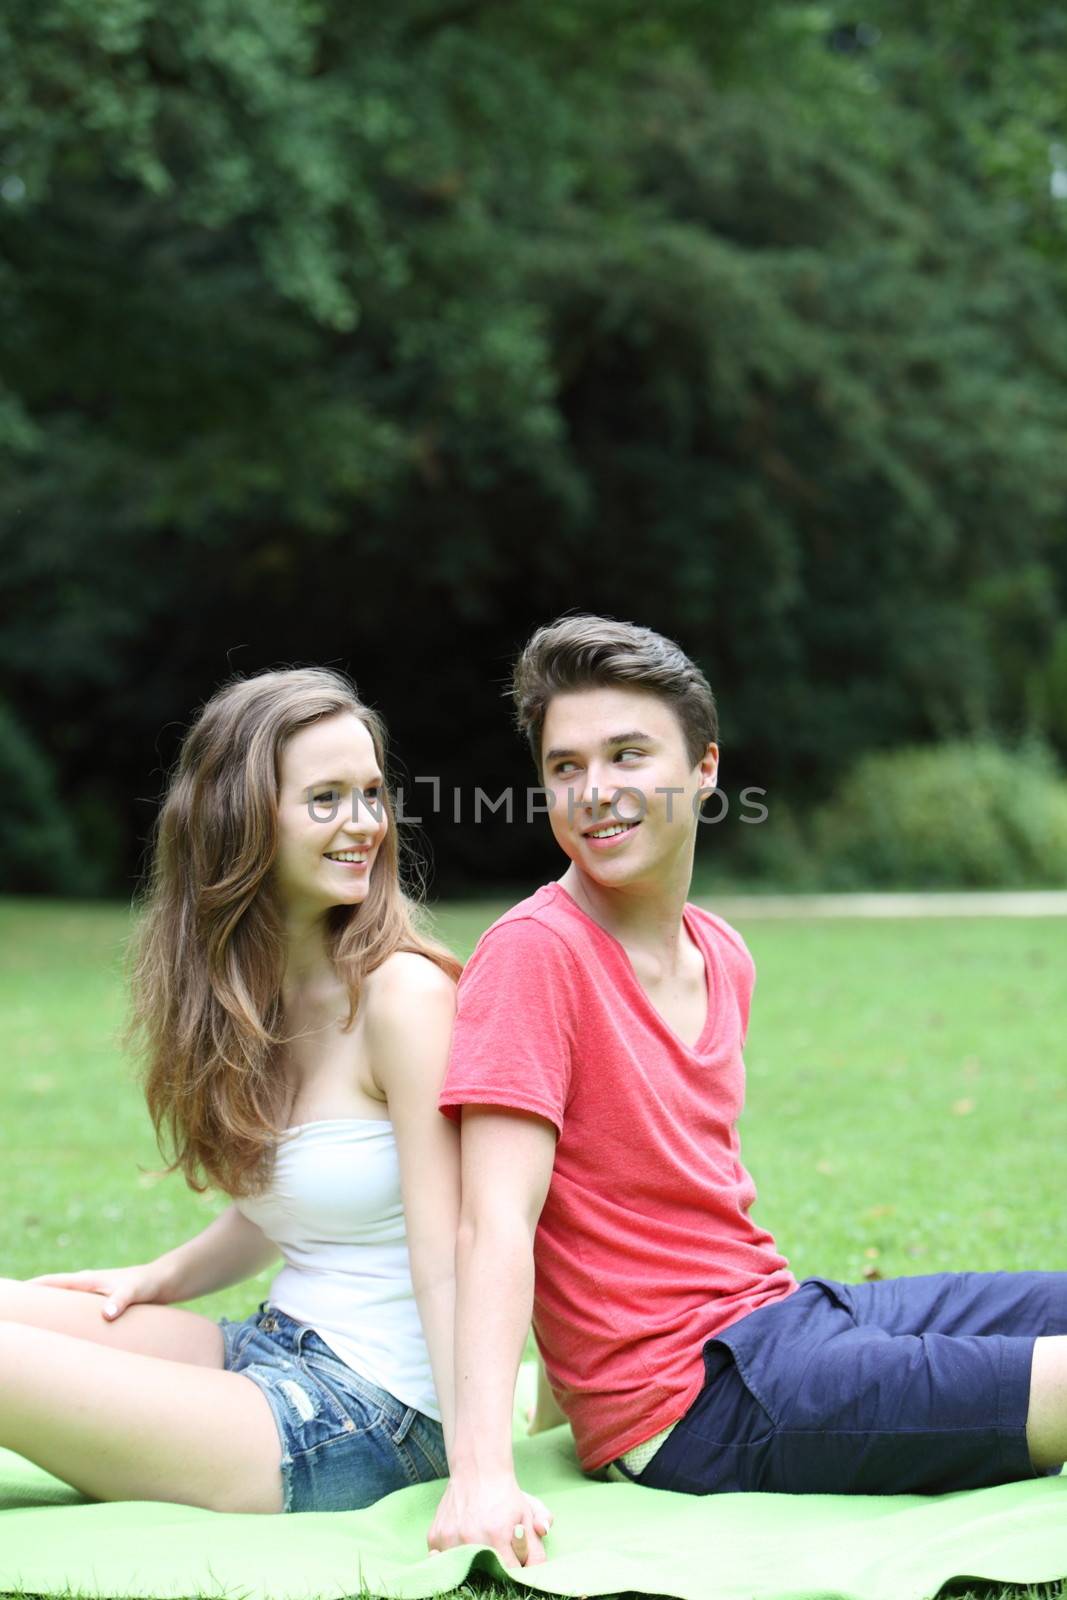 Young teenage couple in the park sitting back to back on the grass looking over their shoulders at each other in a lush green park